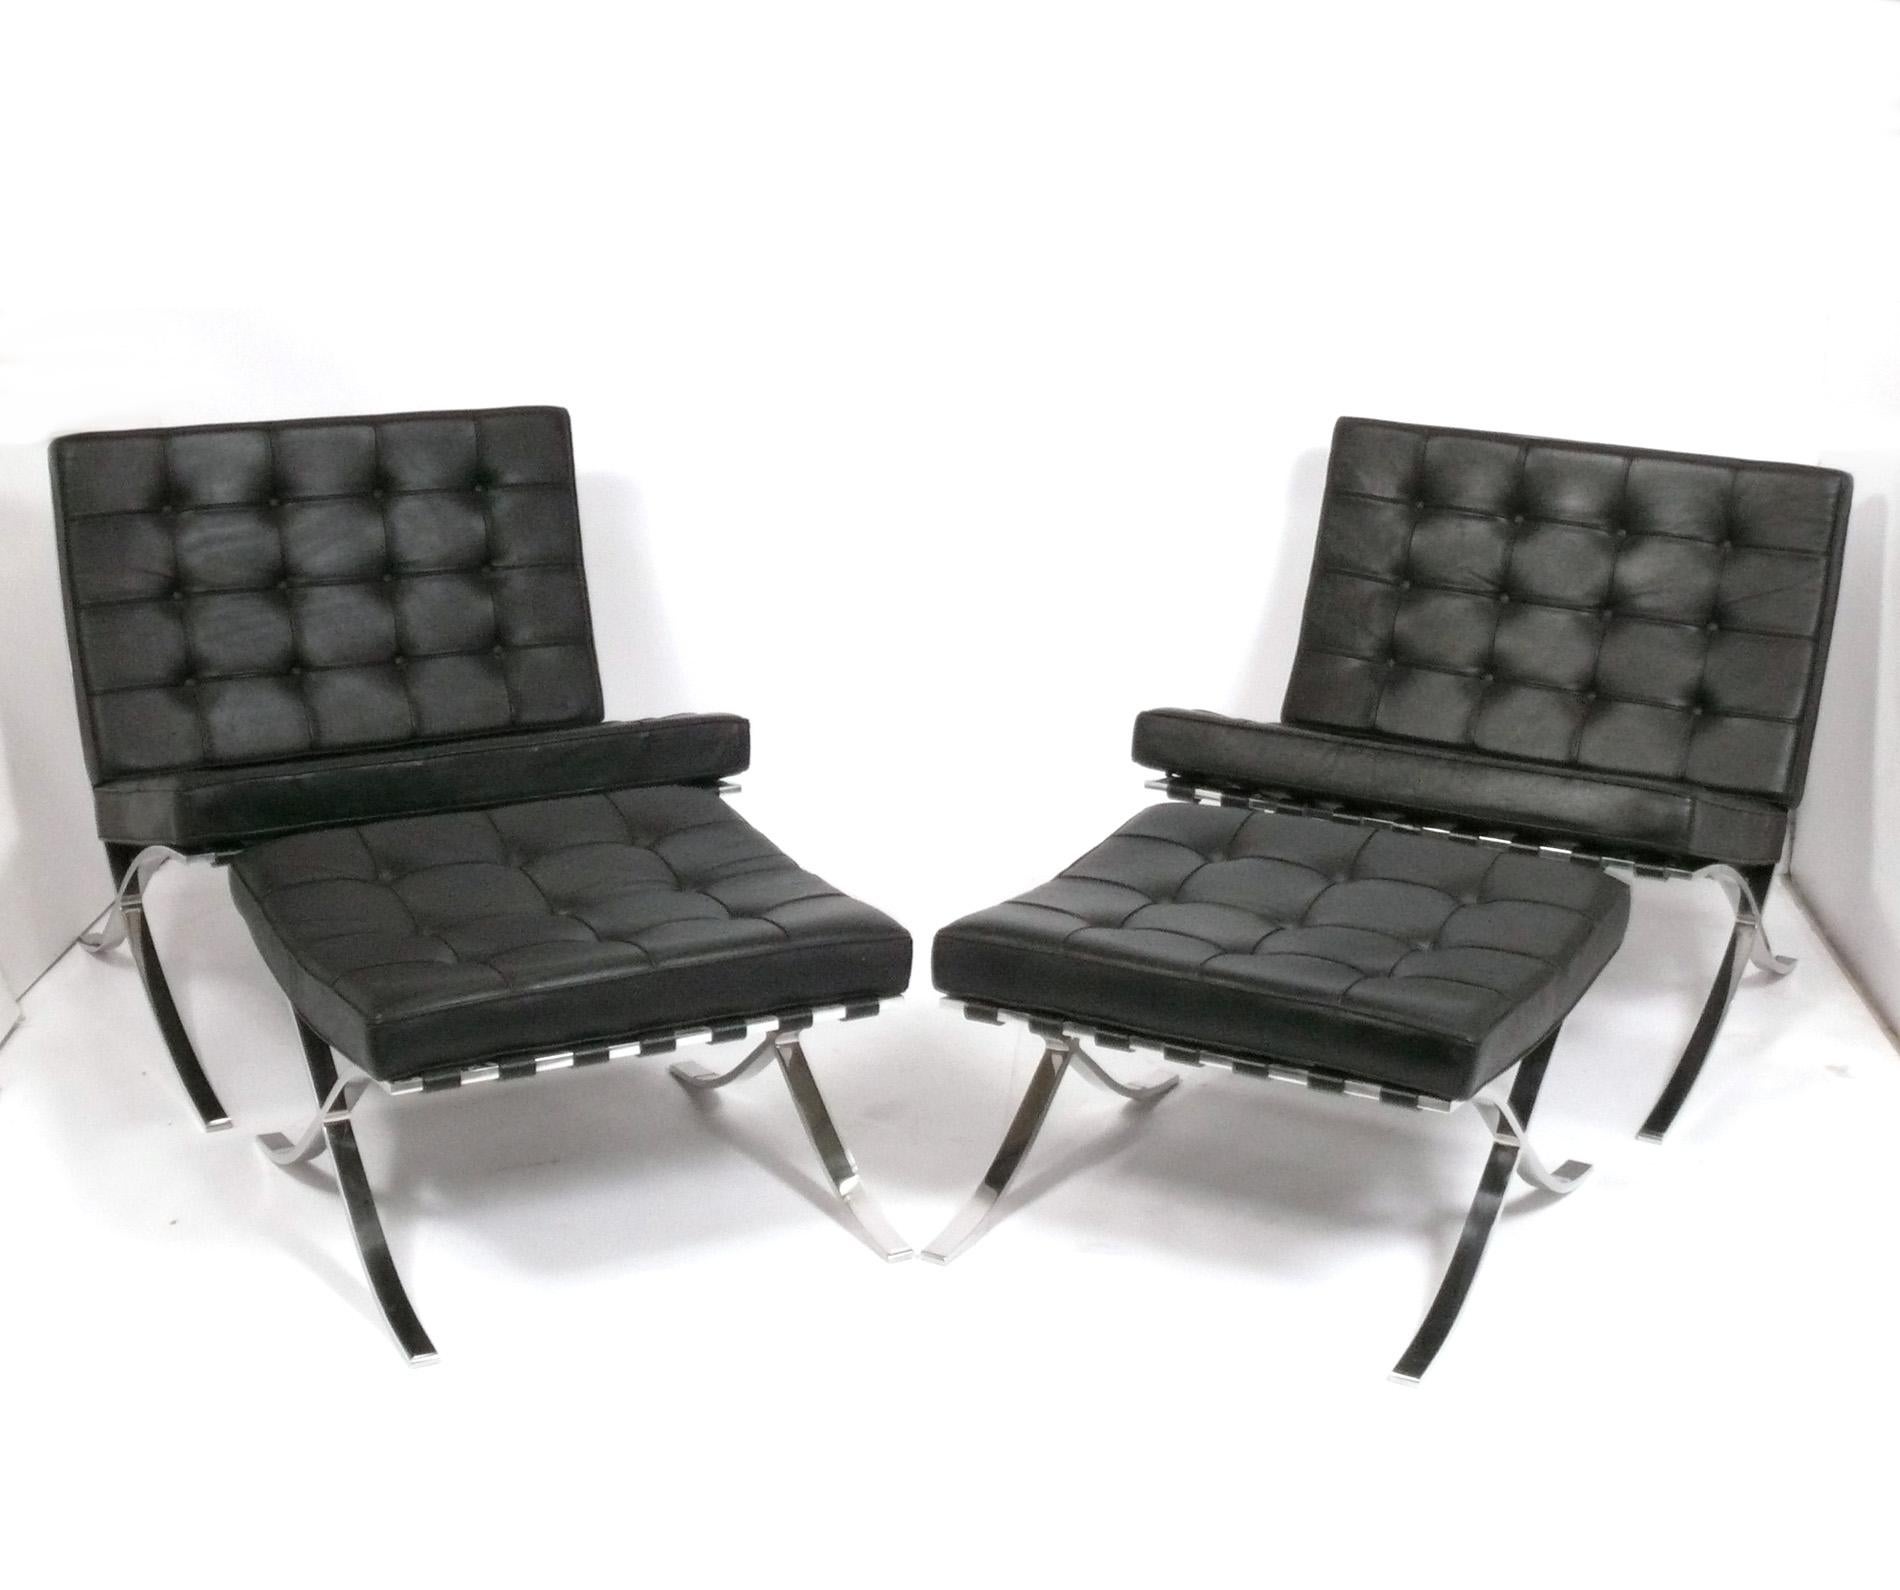 American Mies van der Rohe for Knoll Barcelona Chairs circa 1979 Pair Available For Sale